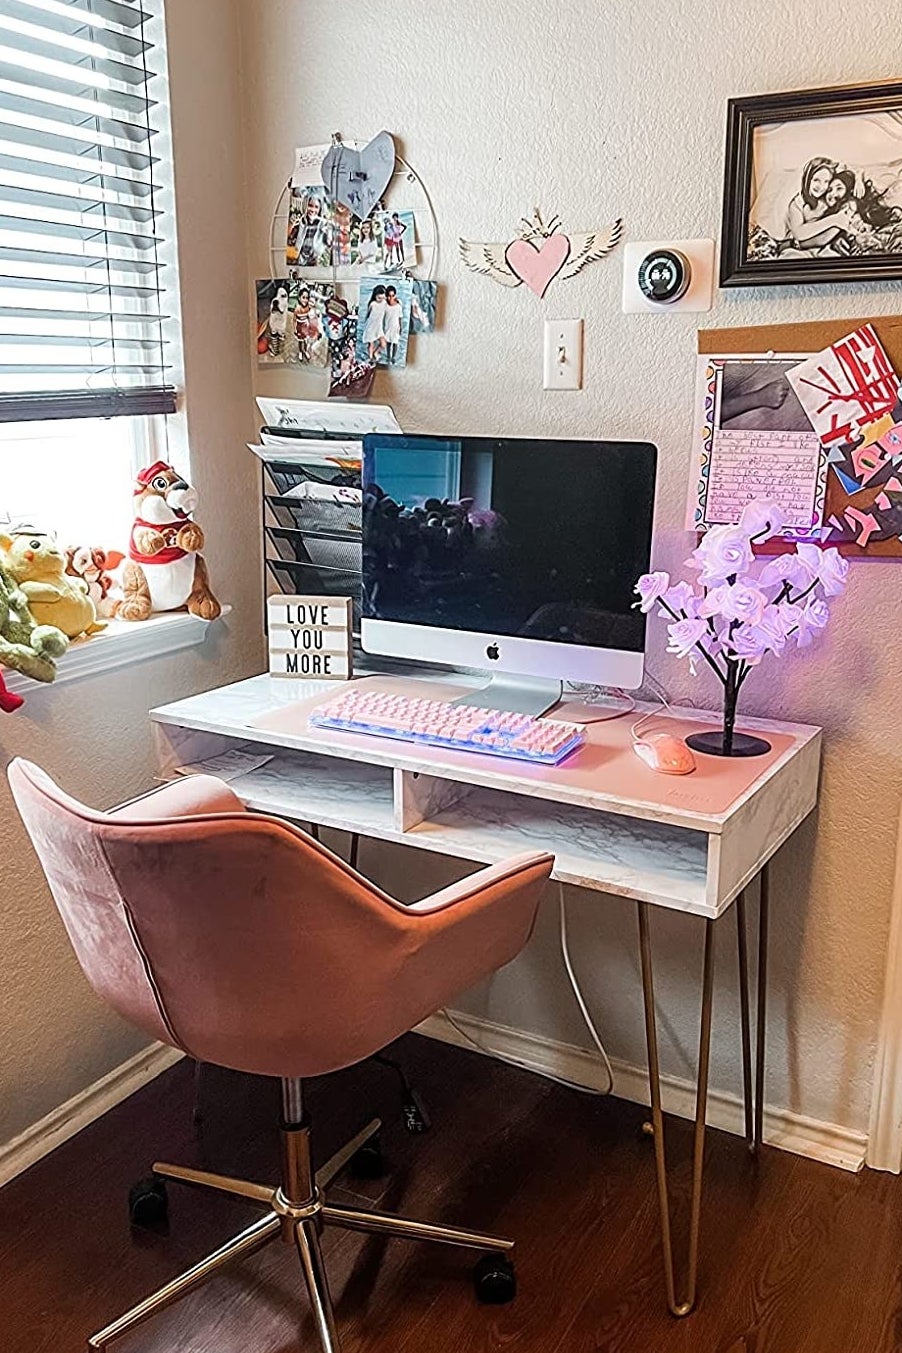 10 Cool Things to Put on Your Work Desk - Coworking Mag